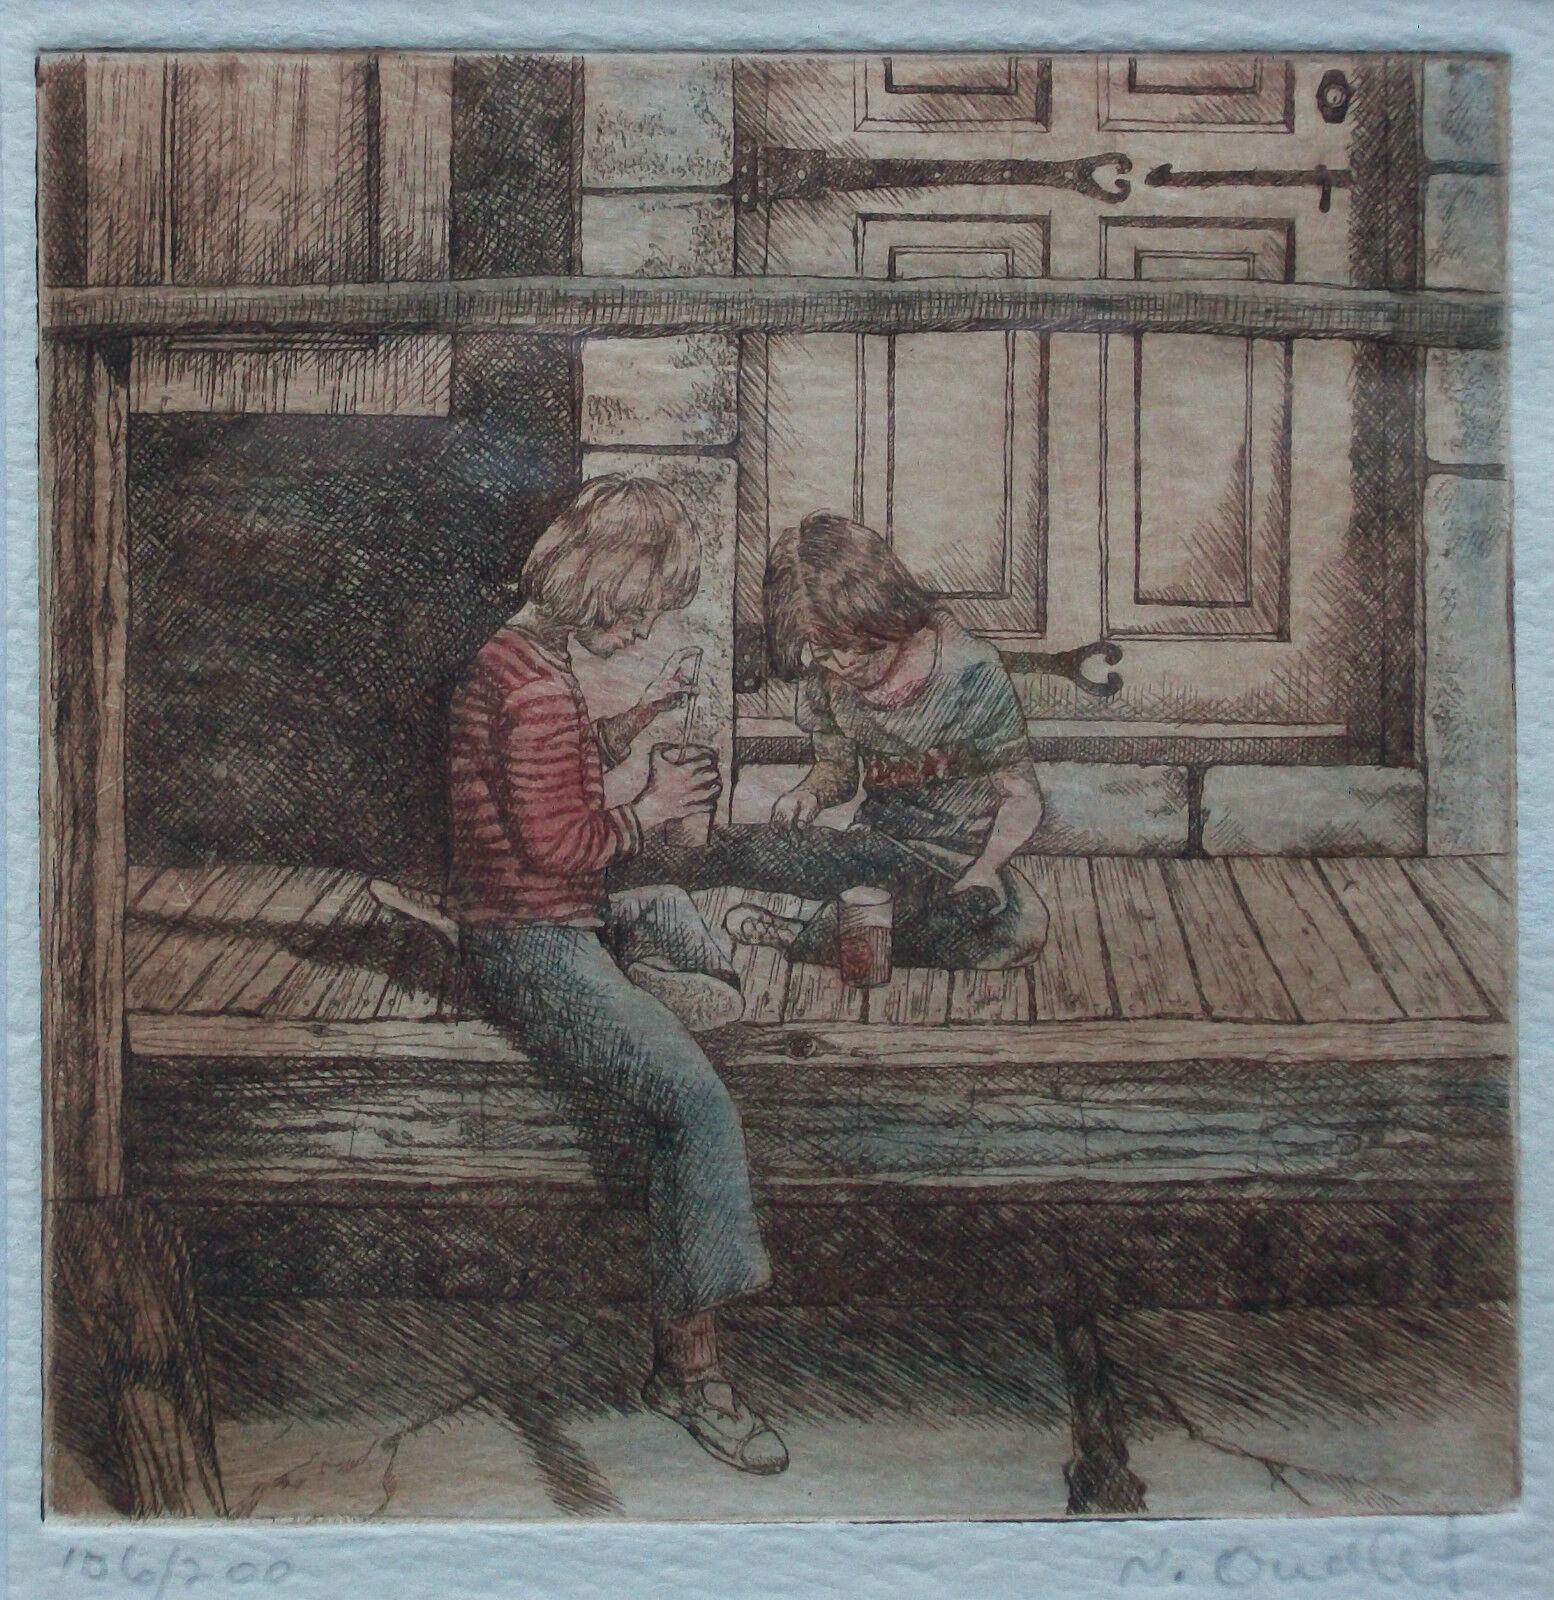 Country N. OUELLET - #106/200 - Vintage Framed Copperplate Engraving - Canada - C. 1978 For Sale